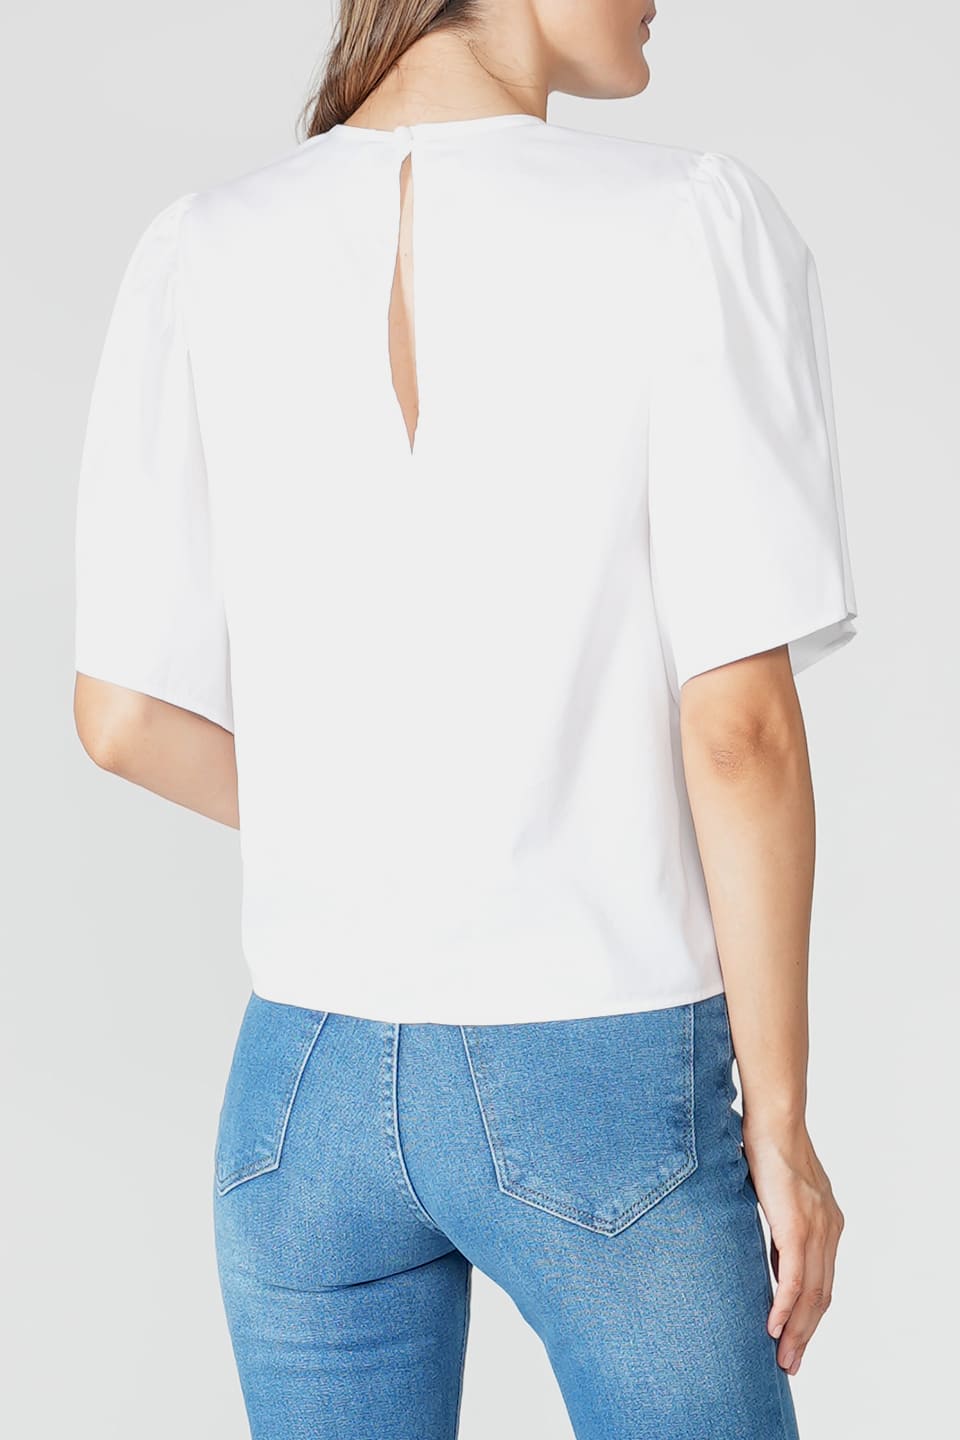 Designer White Women short sleeve, shop online with free delivery in UAE. Product gallery 5